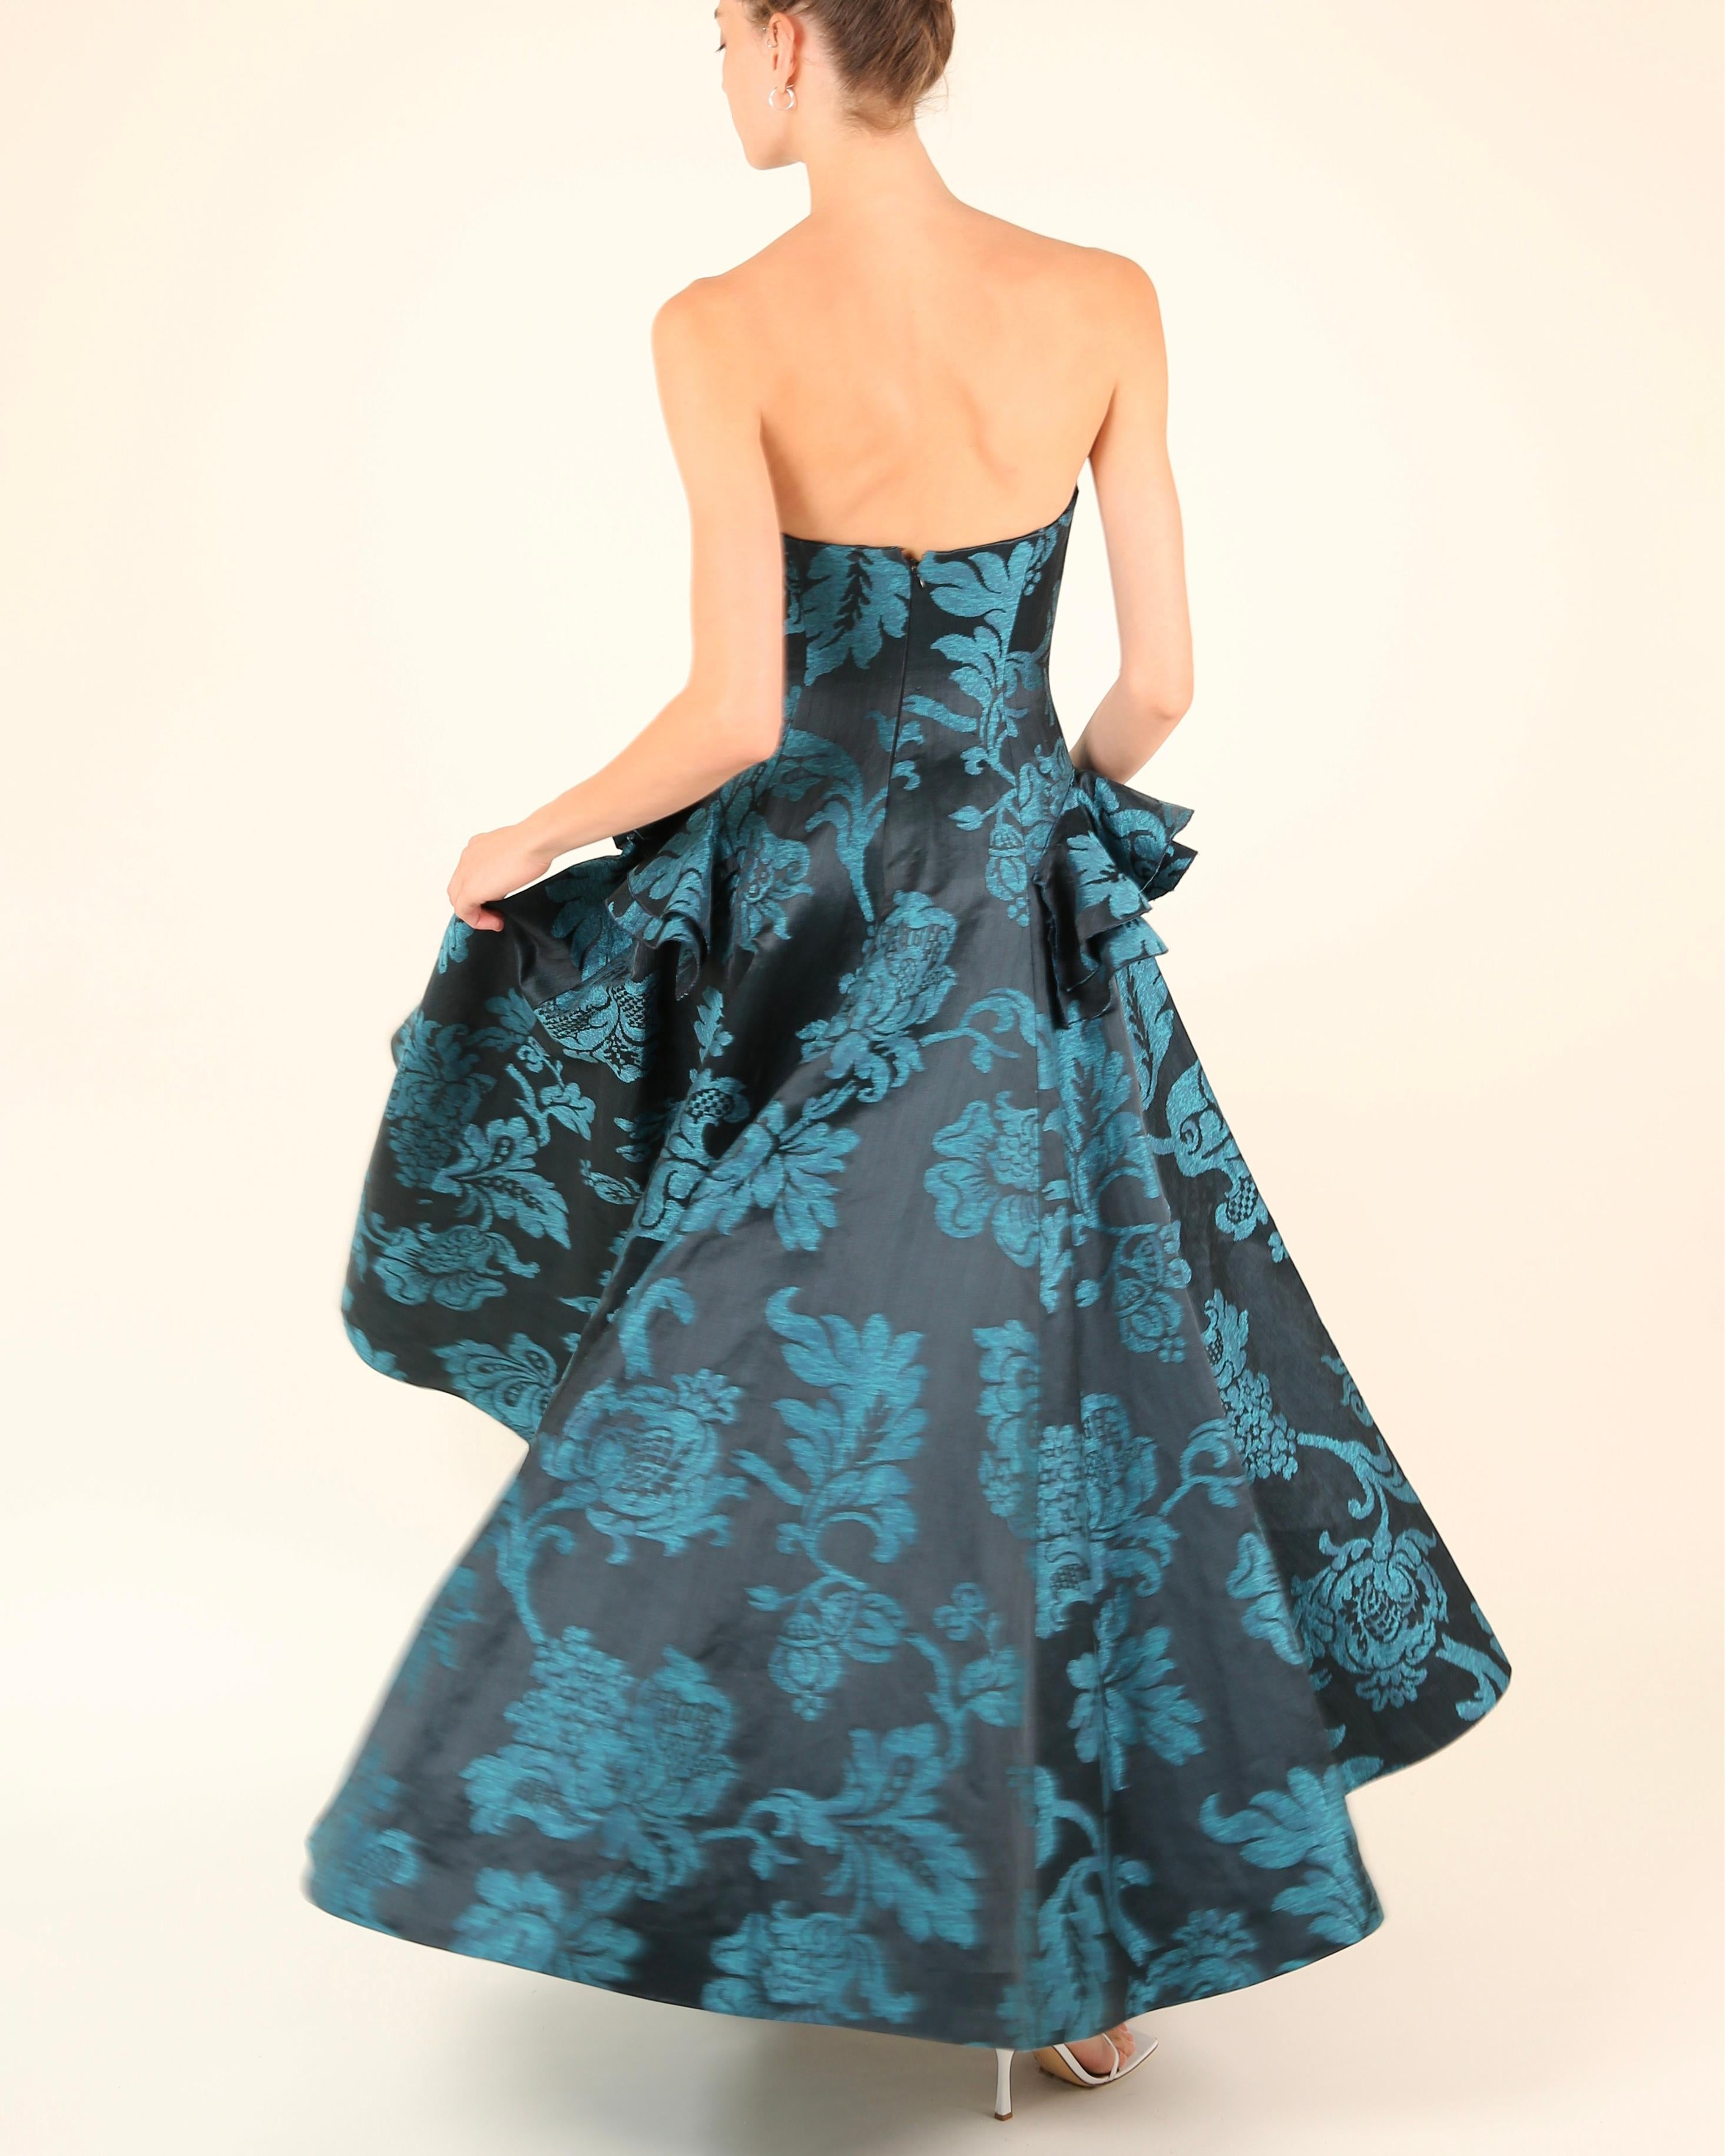 Oscar de la Renta F/W06 strapless floral blue teal fit and flare dress gown XS For Sale 12